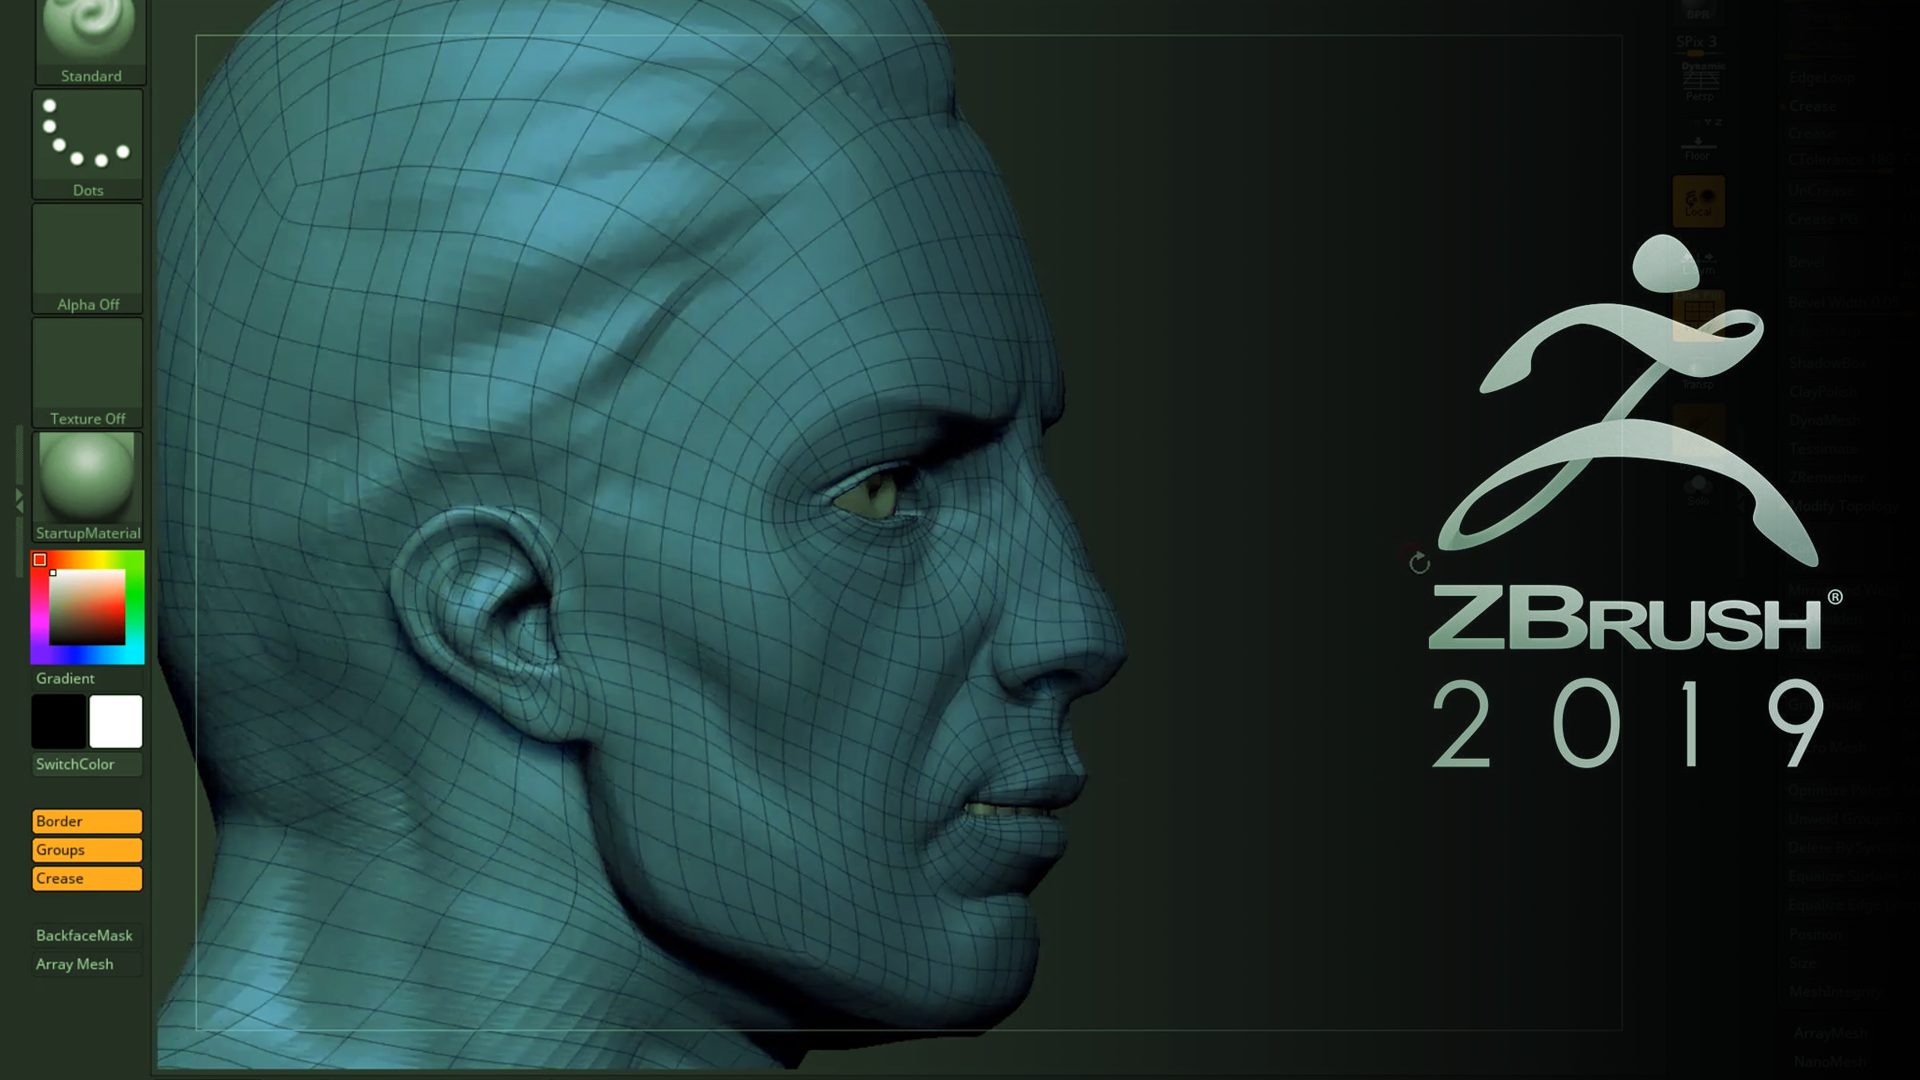 gumroad intro to zbrush part 3 by michael pavlovich